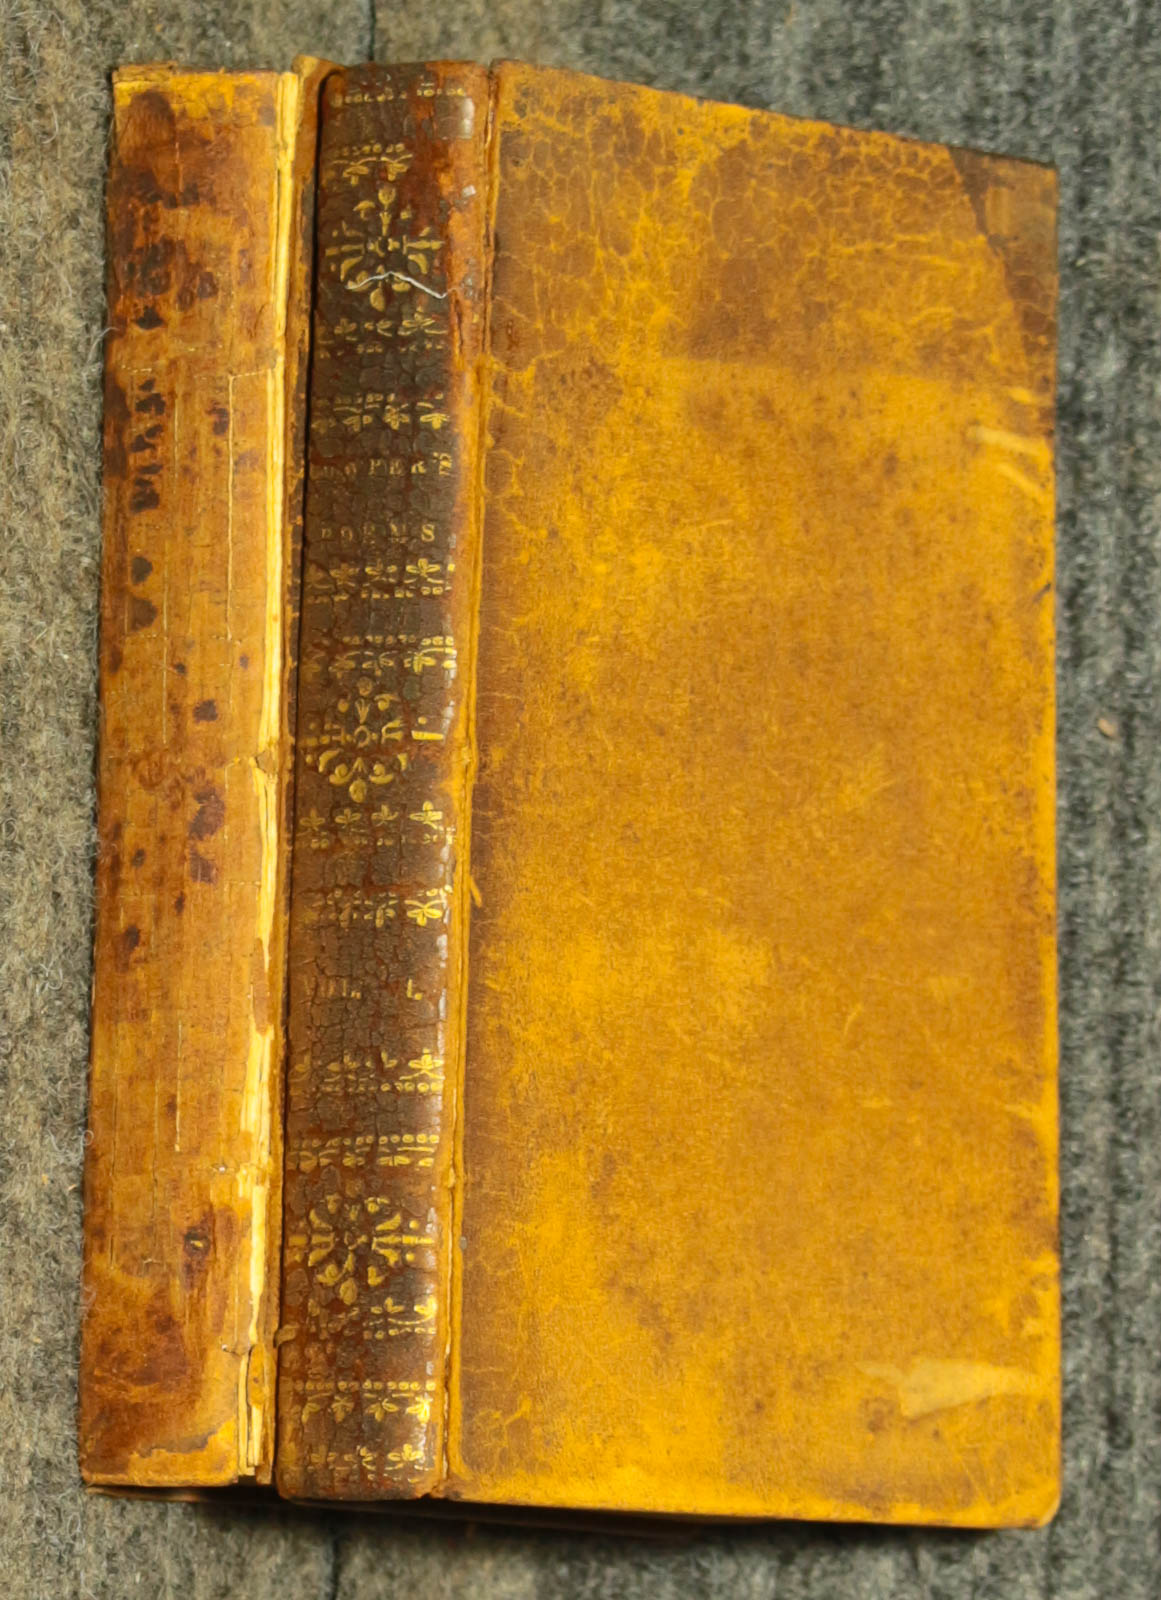 Image for POEMS, BY WILLIAM COWPER, ESQ. OF THE INNER TEMPLE, IN THREE VOLUMES, COMPRISING A VARIETY OF PIECES NOT INSERTED IN FORMER EDITIONS, TO WHICH IS PREFIXED A BRIEF ACCOUNT OF HIS LIFE. [VOLS I AND III ONLY] This Book Number Was a Different Undescribed One- Tossed it Away.